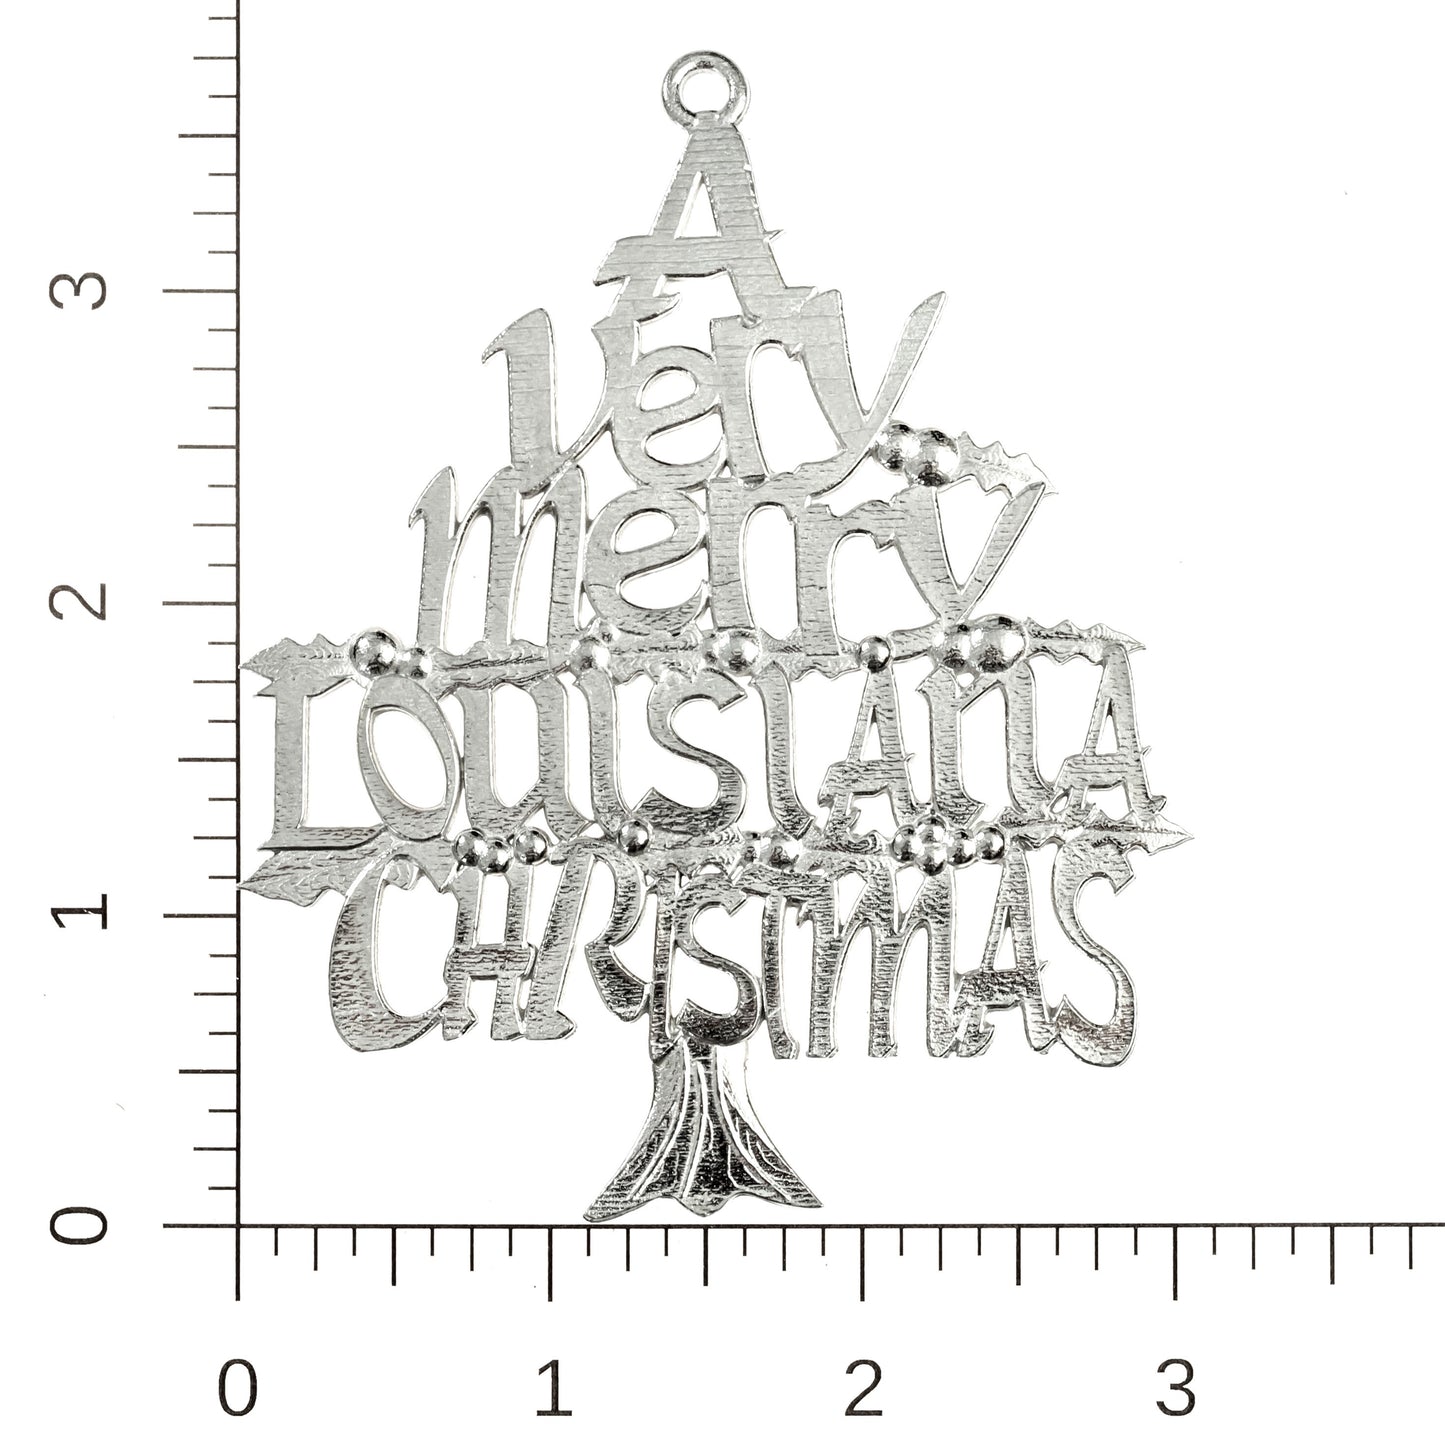 handcrafted pewter homestate ornament Louisiana